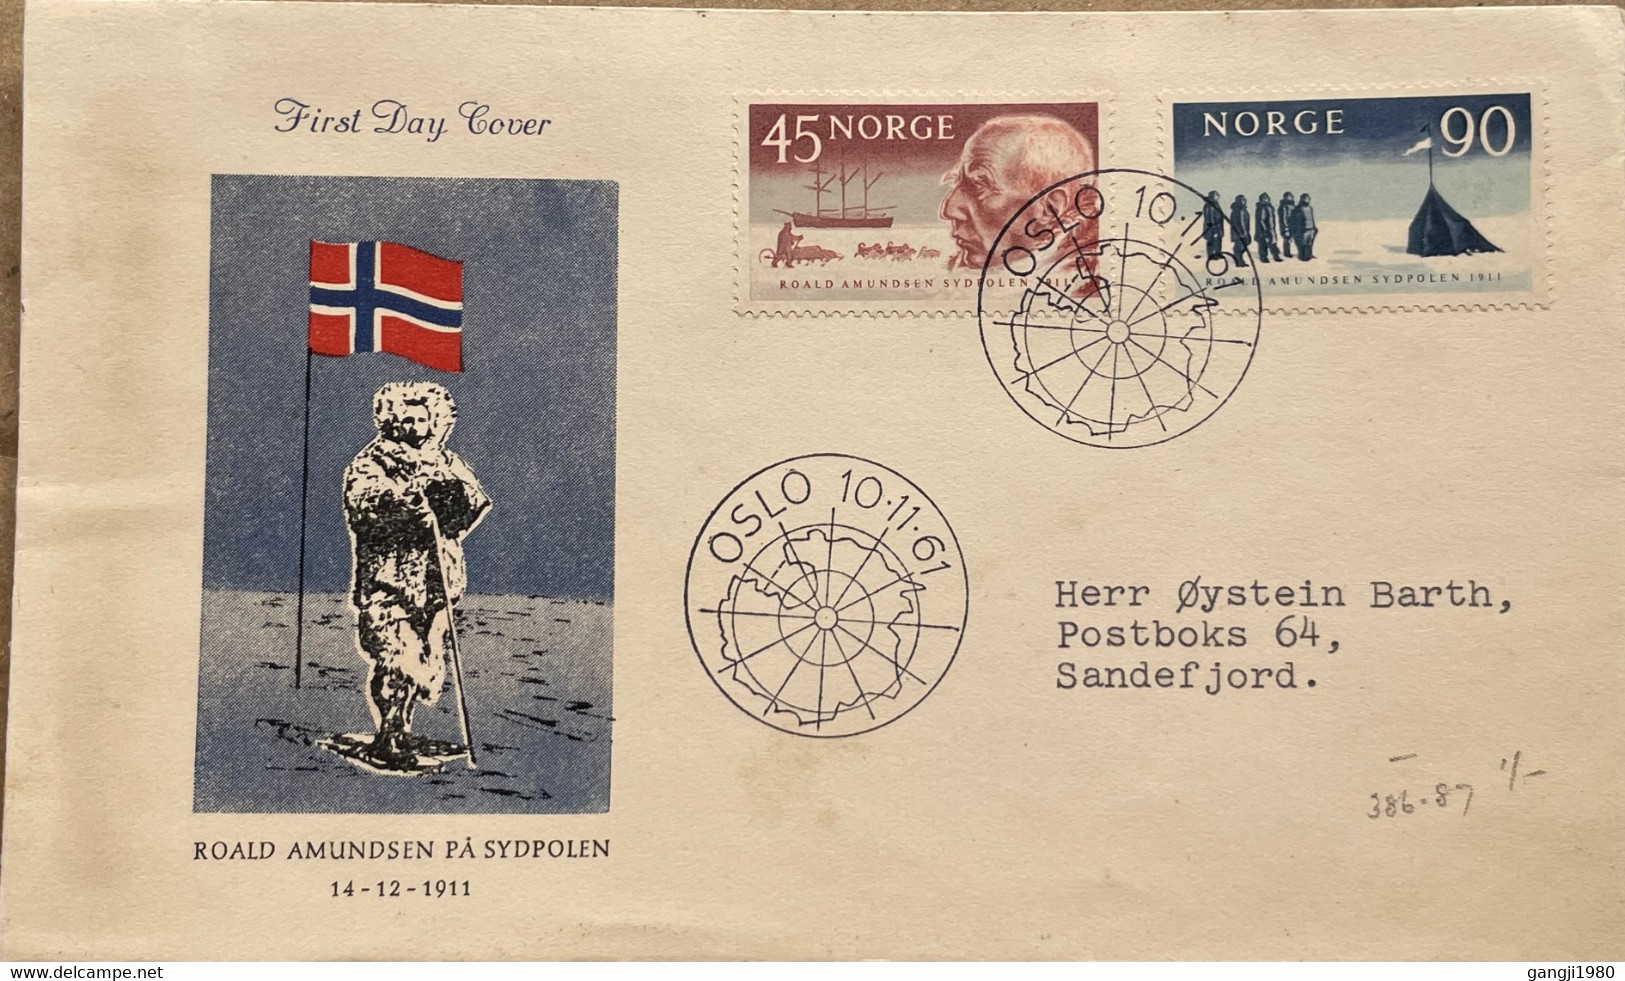 NORWAY 1961, FDC PRIVATE COVER, ILLUSTRATE FLAG, AMUNDSEN'S ARRIVAL AT SOUTH POLE, PARTY & TENT, 2 STAMP, OSLO CITY CANC - Briefe U. Dokumente